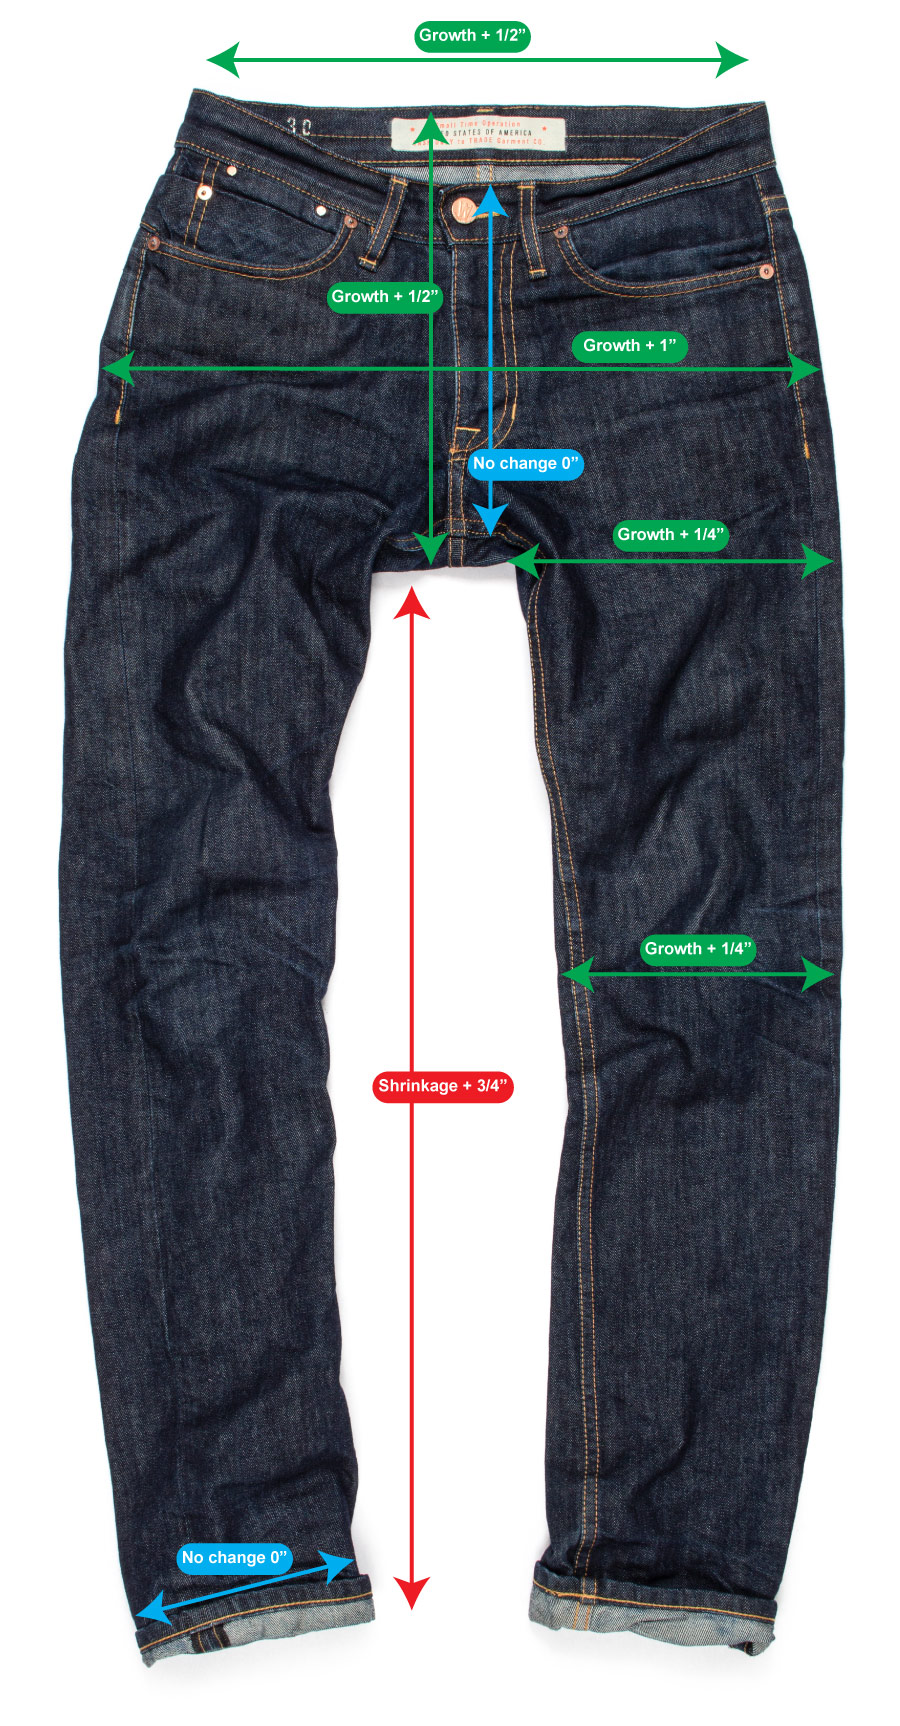 What Changes in Raw Denim Jeans Post Wash & Wear